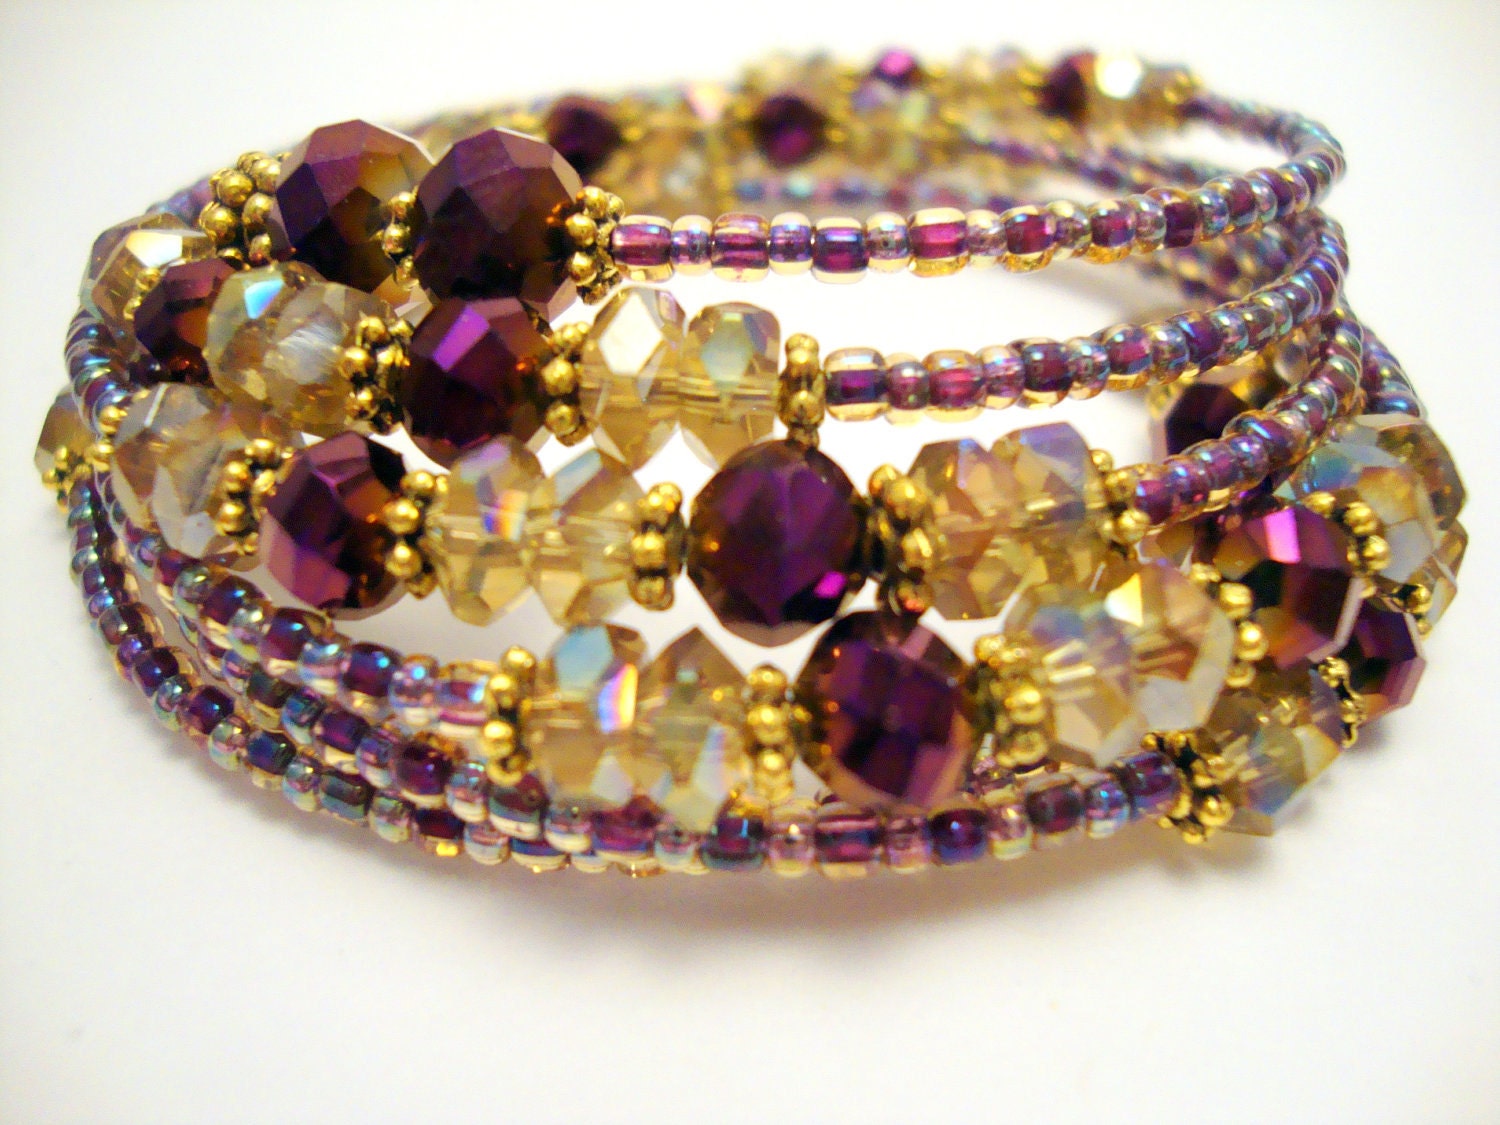 Wrap Bracelet on Memory Wire Topaz, Magenta, Grape Beads and Crystals